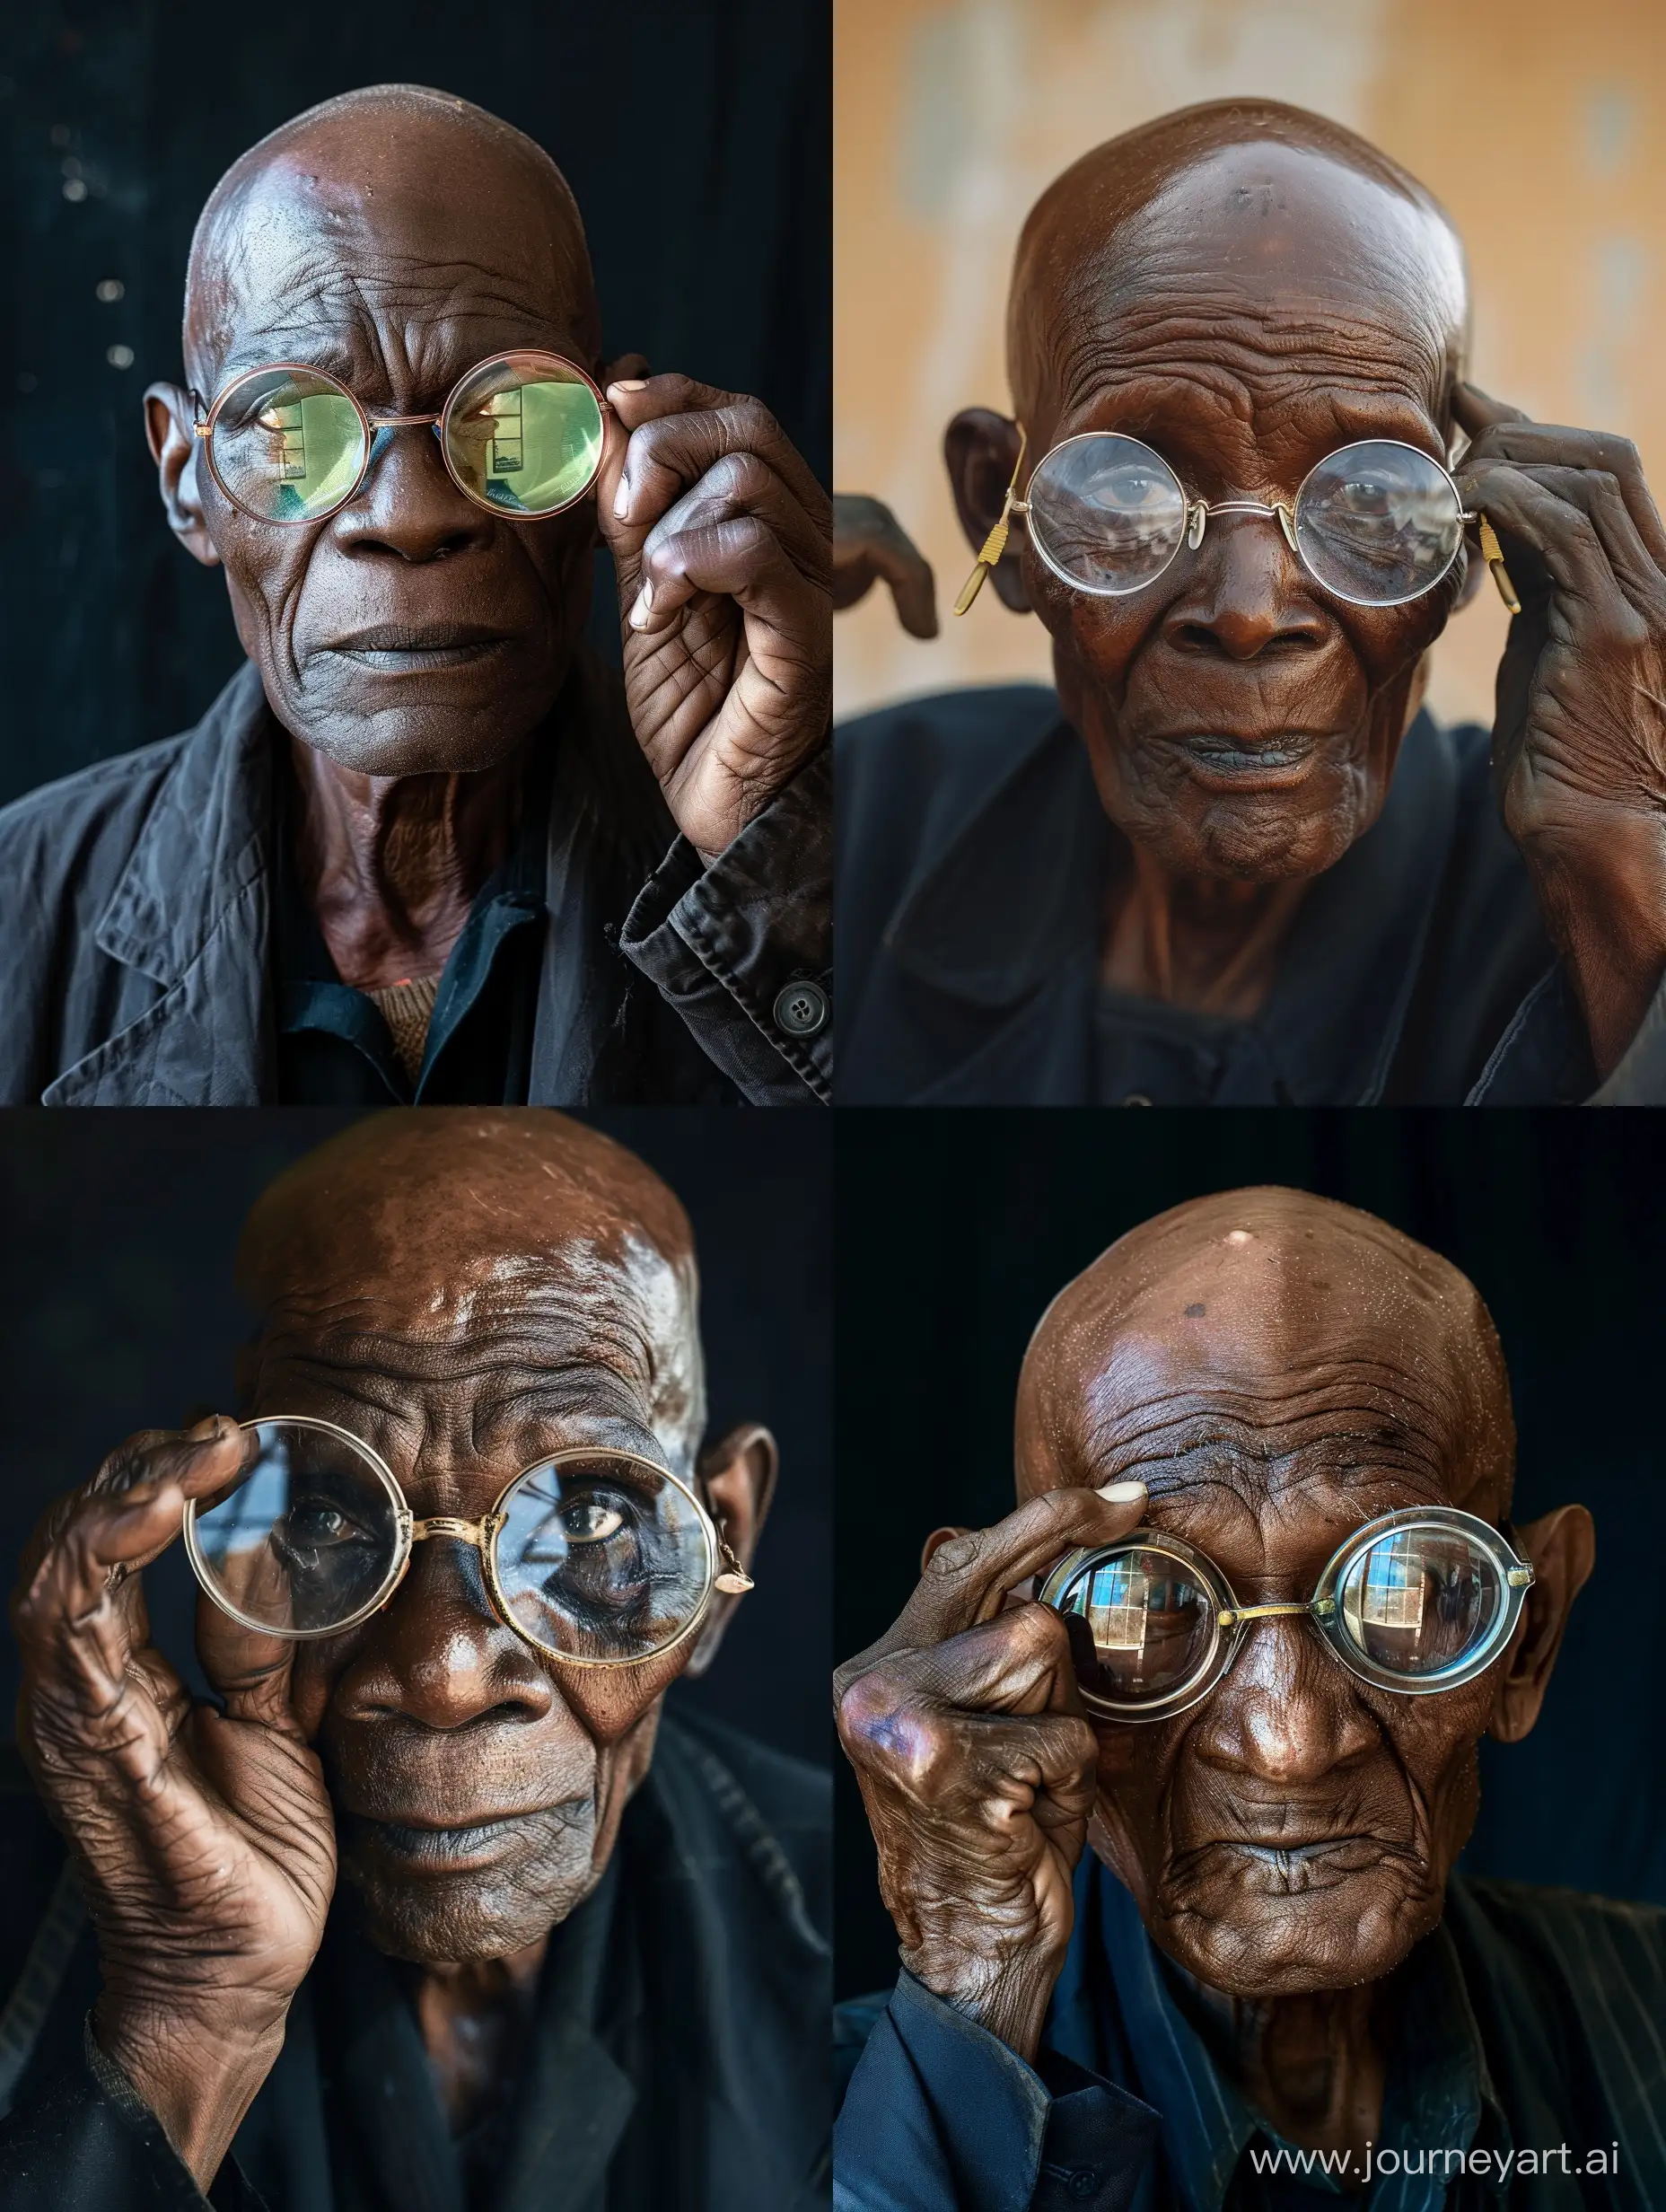 Old bald African man adjusting his old clear and very reflective round reading glasses.